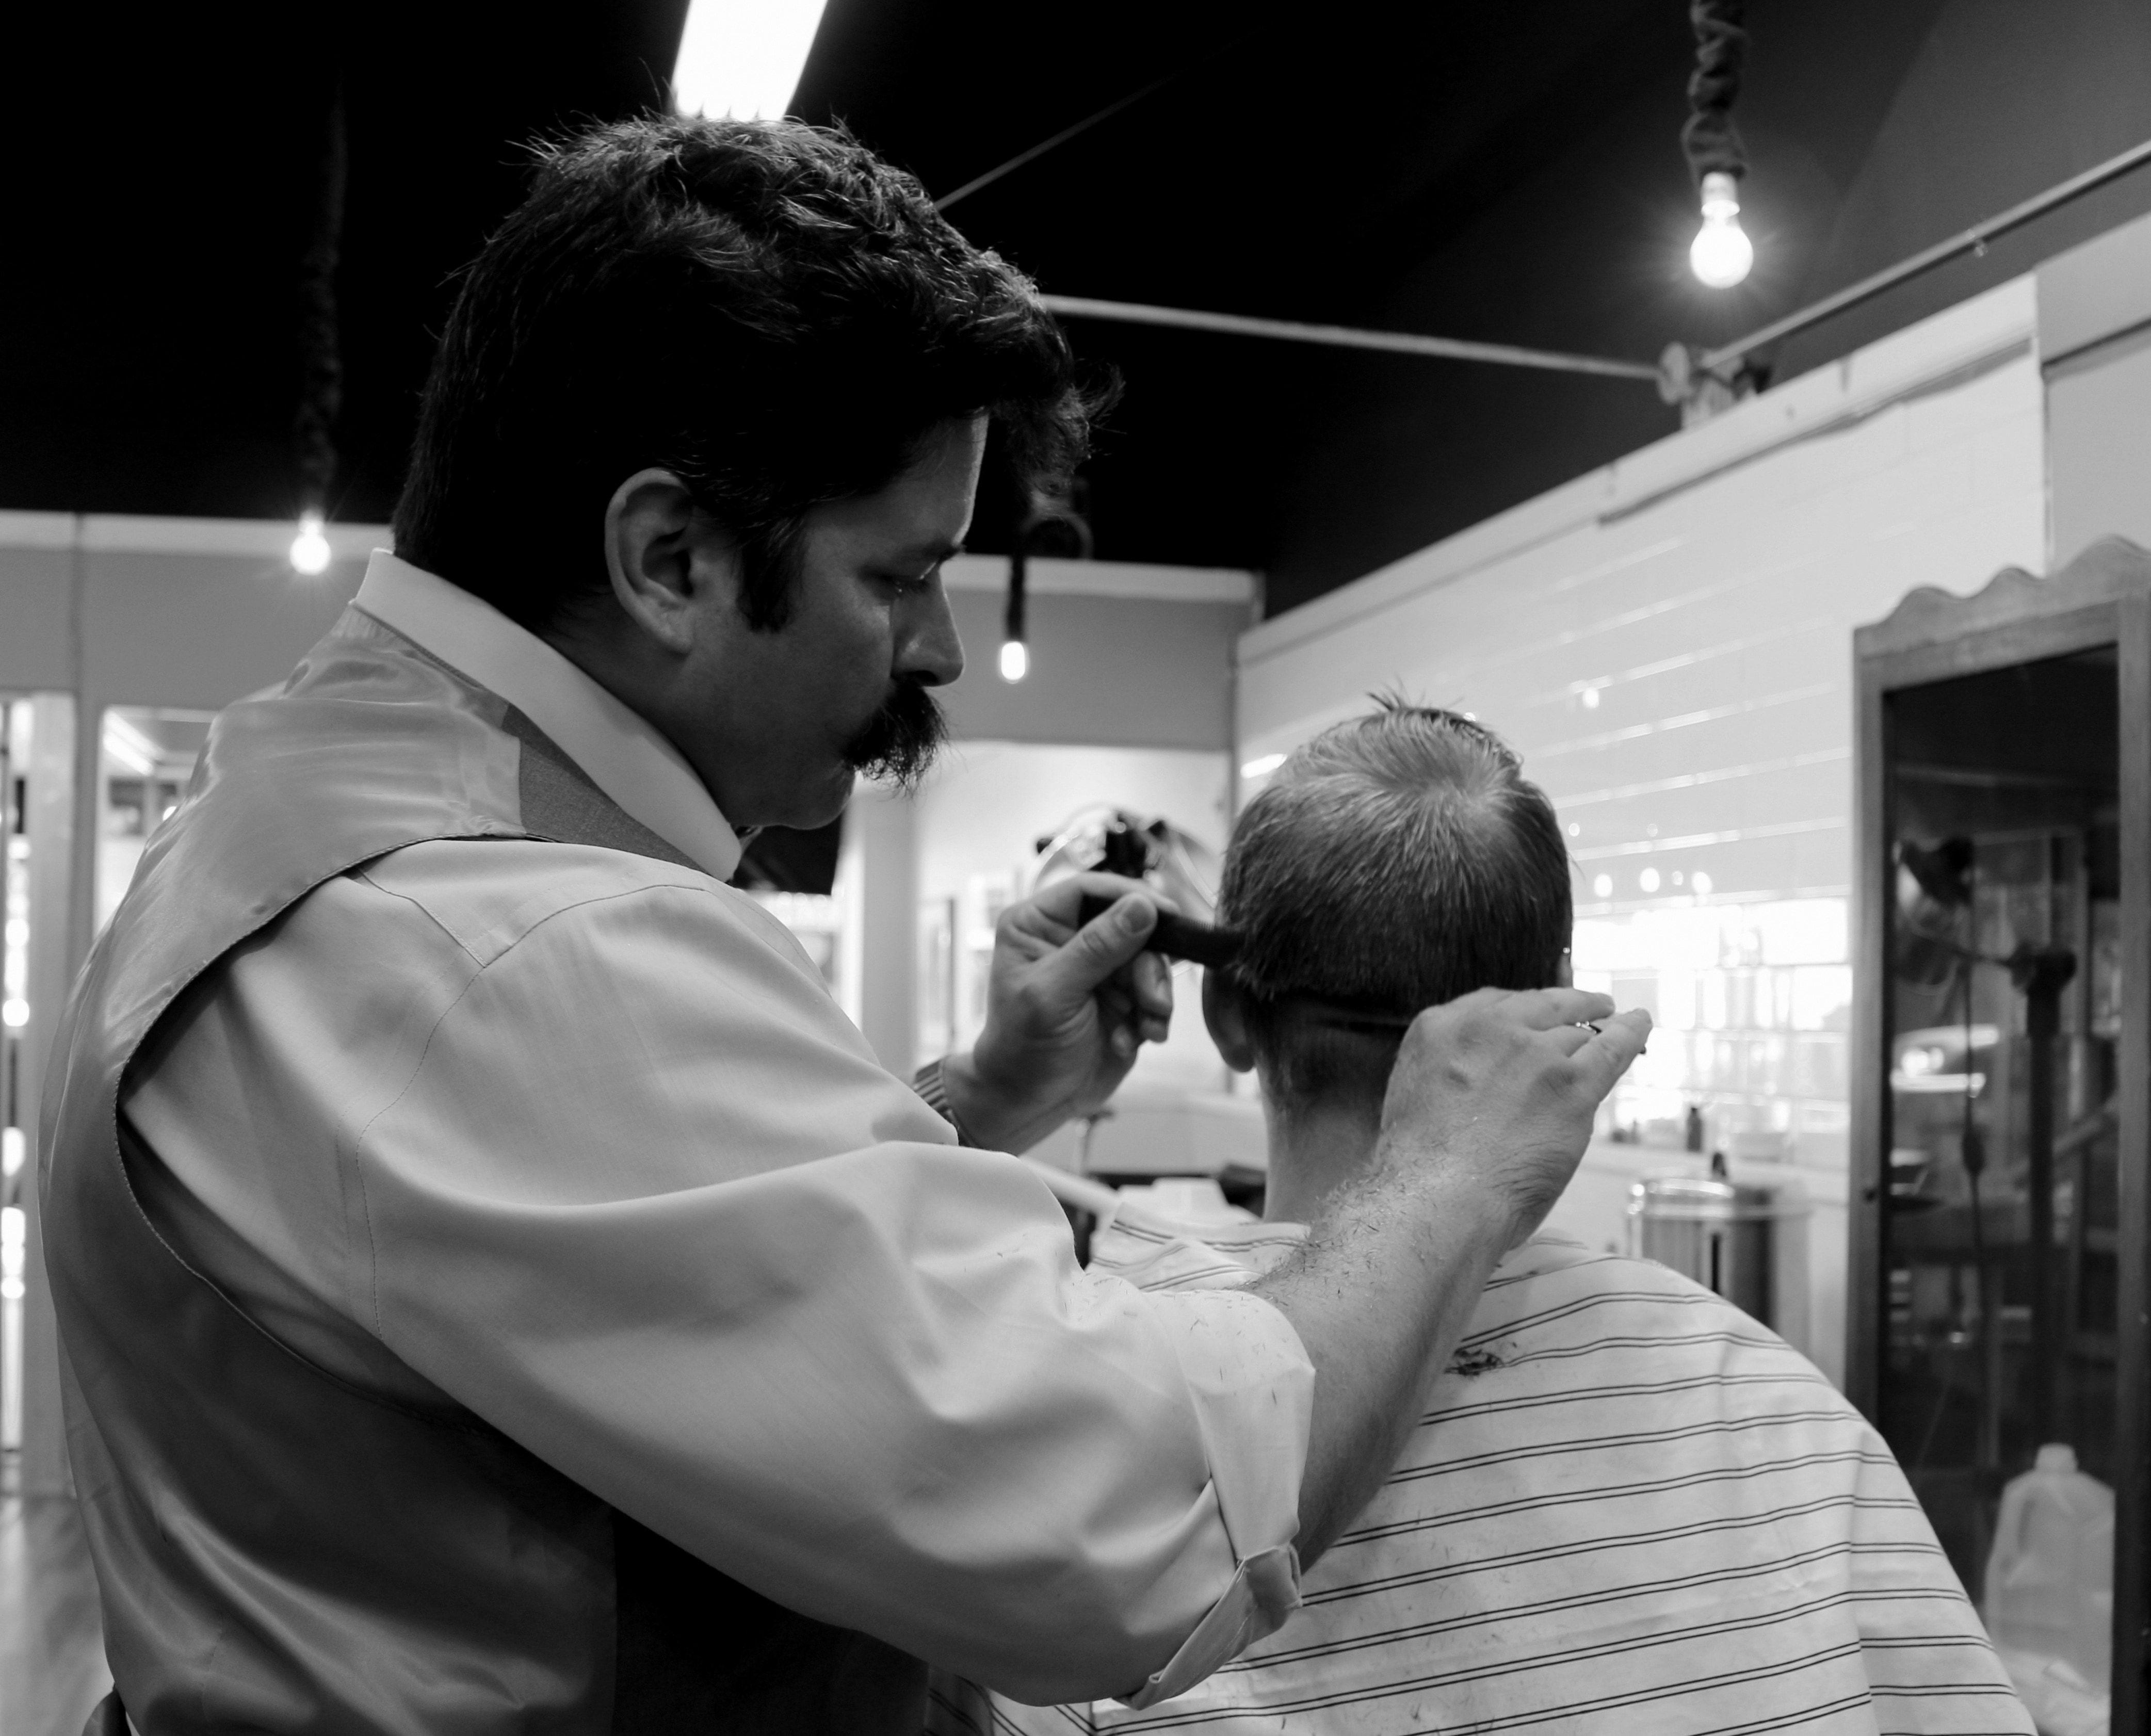 man cutting hair of boy in grayscale photography free image